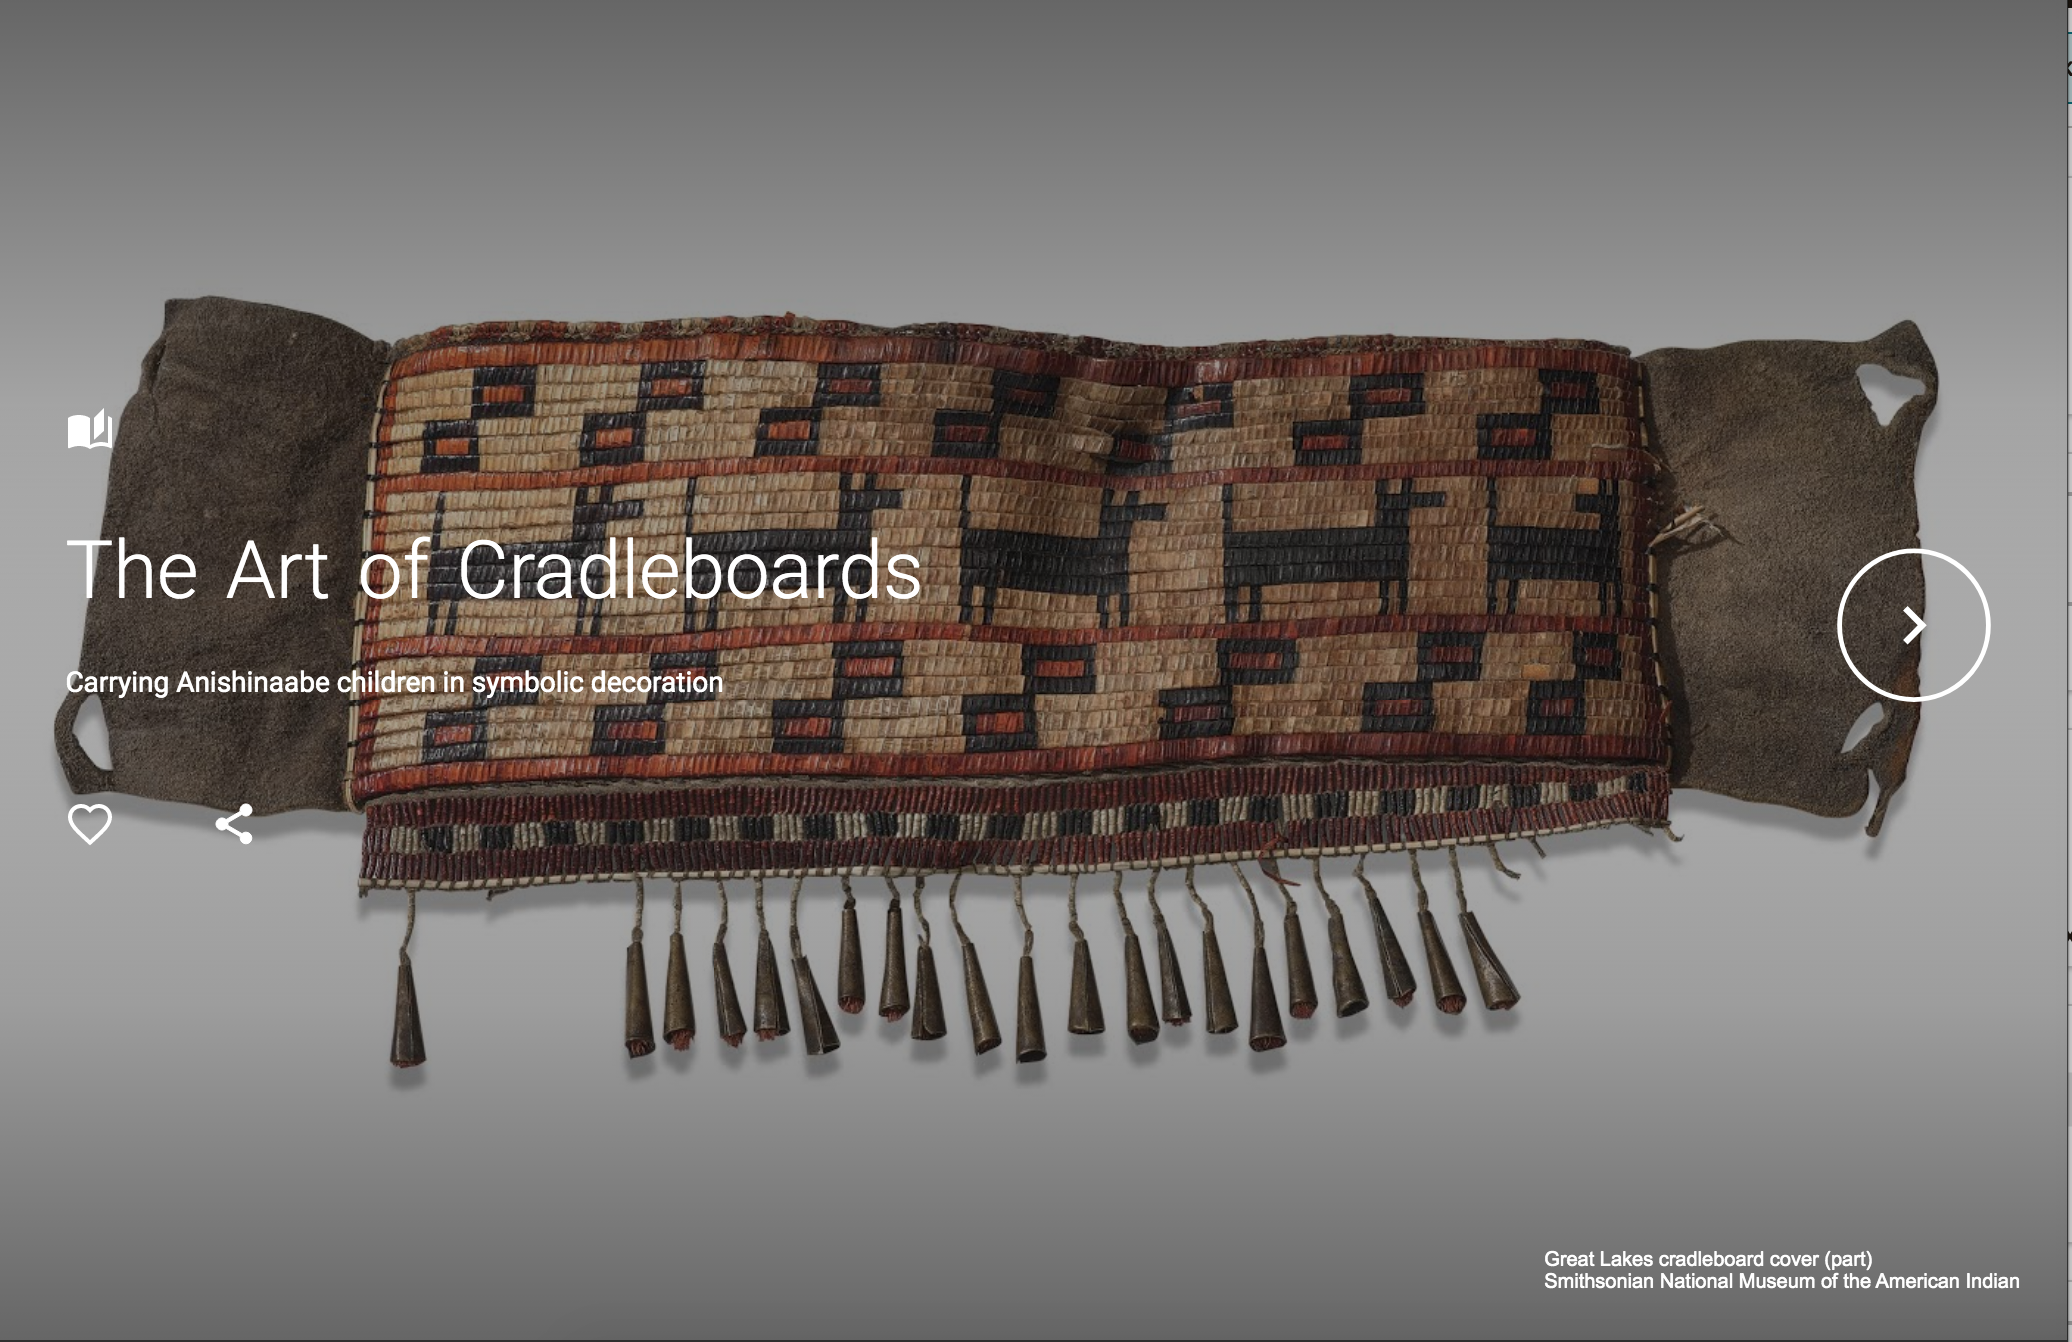 Interactive exhibition from the Smithsonian Museum of the American Indian about one cradleboard